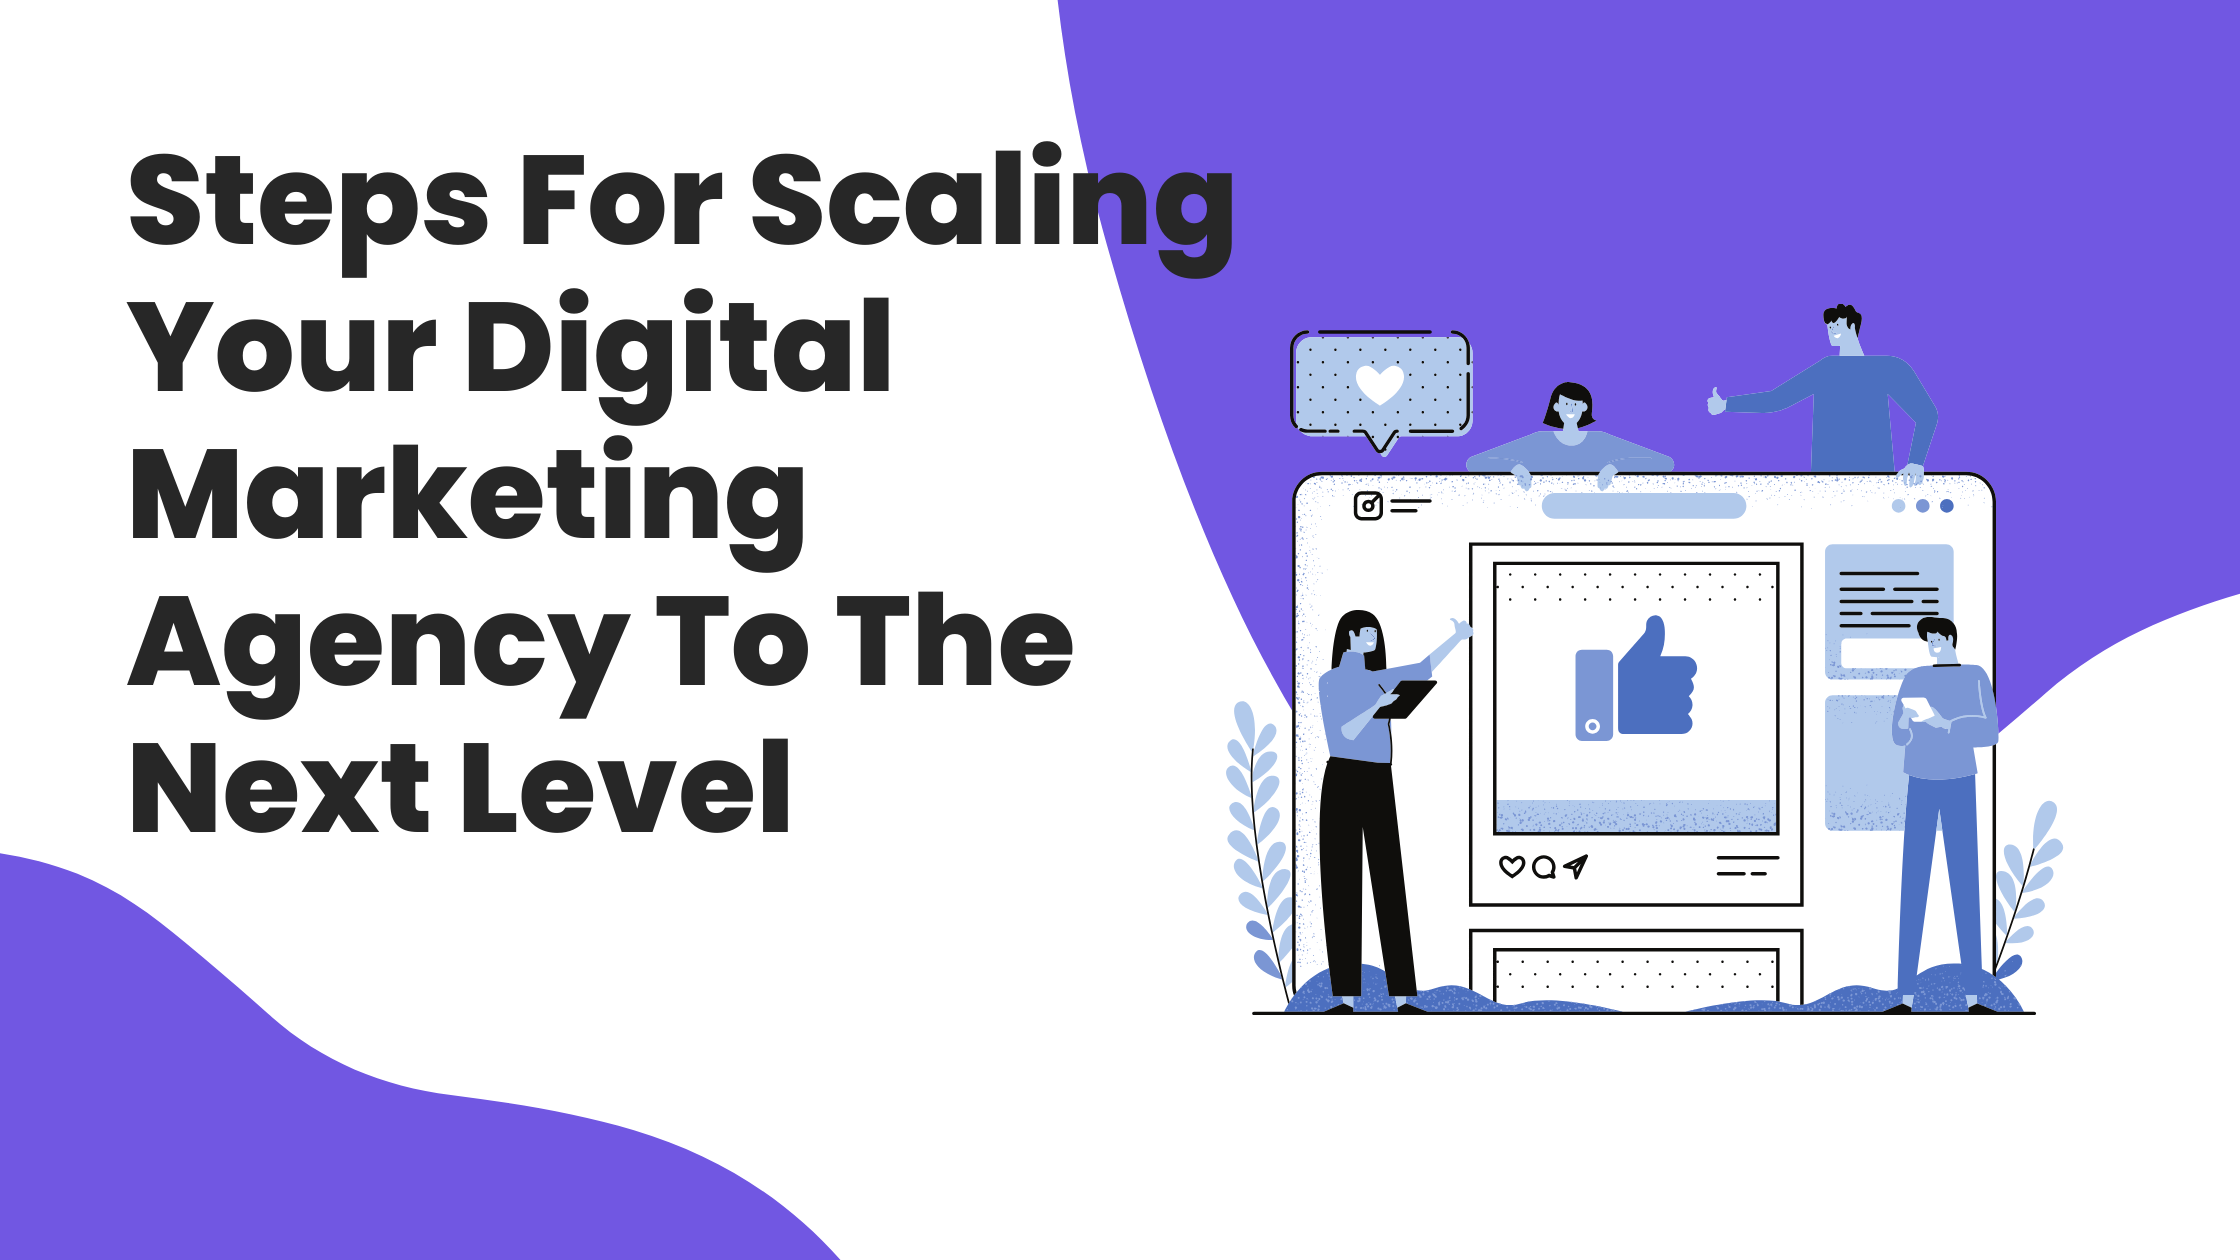 Steps For Scaling Your Digital Marketing Agency To The Next Level